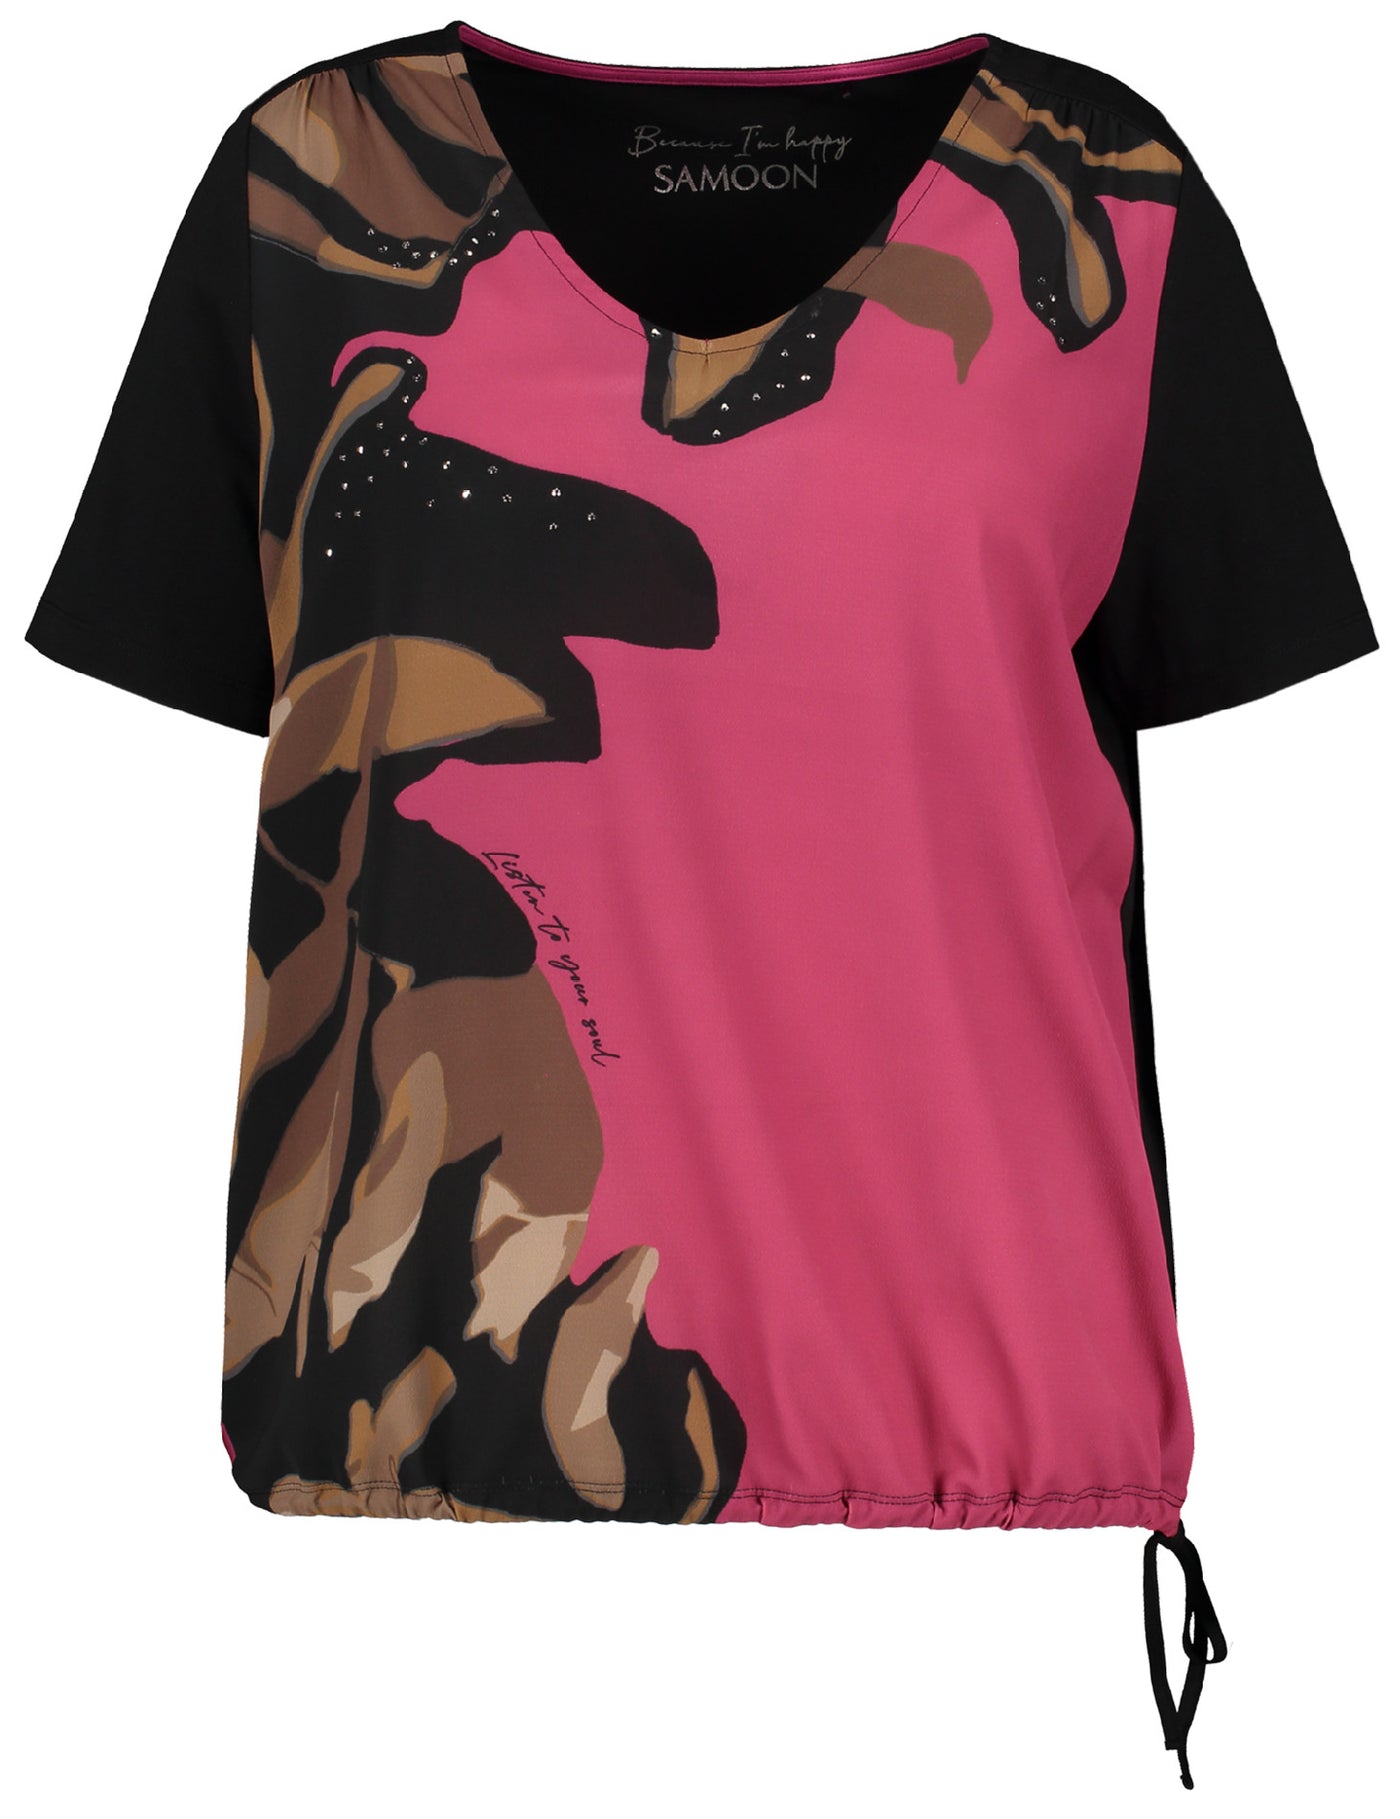 Samoon V-neck top With Print Front & Jersey Back in Black Print